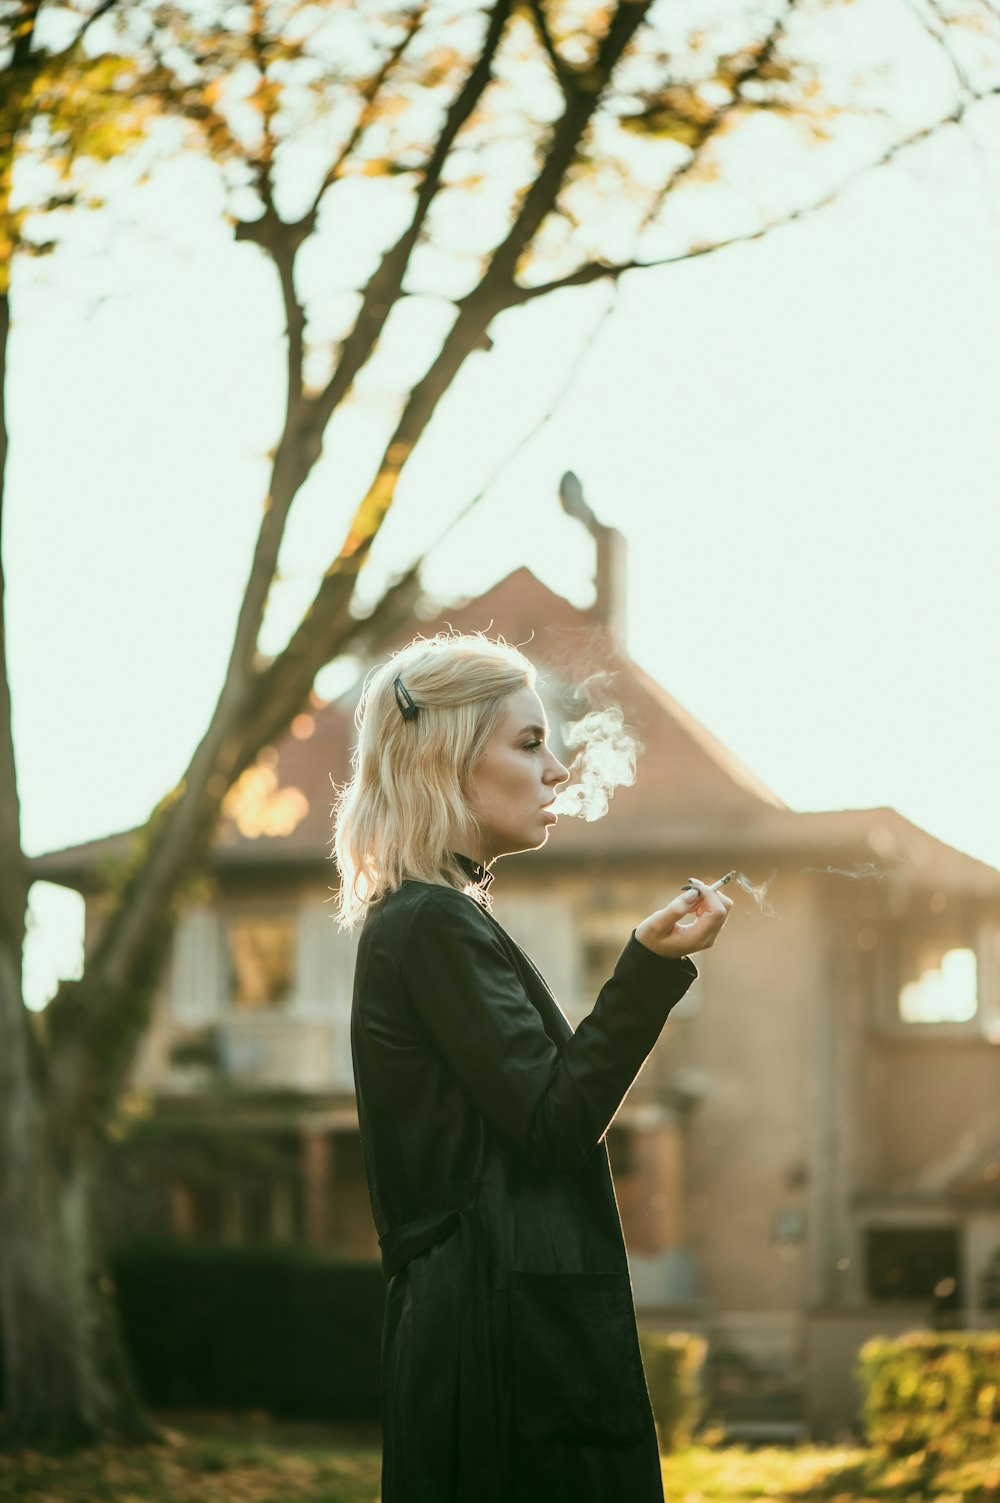 a woman standing in front of a tree smoking a cigarette